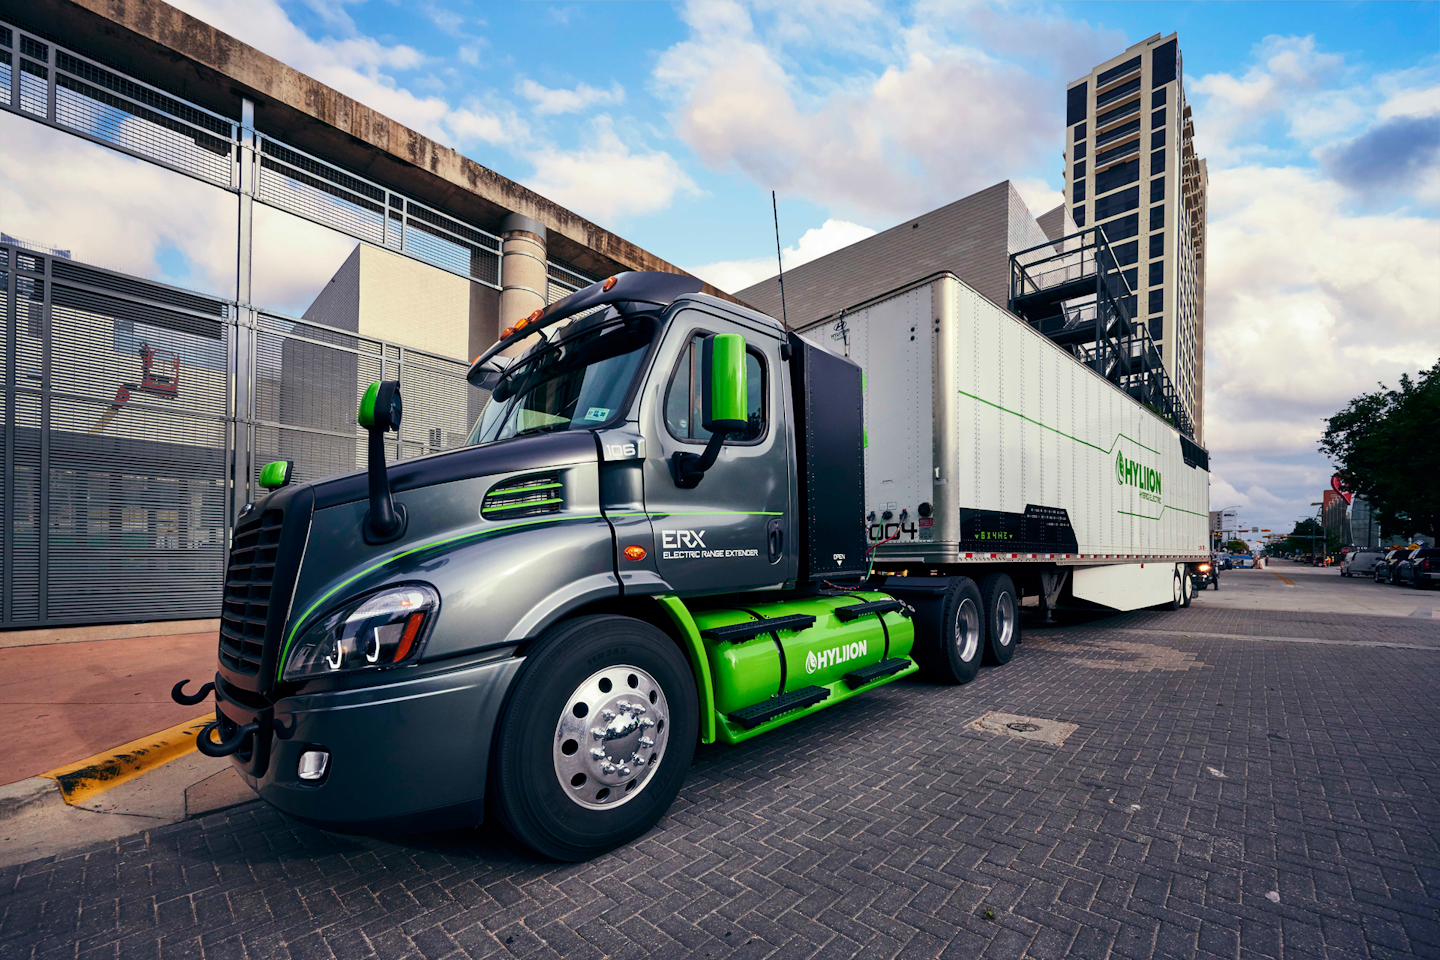 The Hypertruck ERX powertrain is expected to begin production at Dana's Monterrey, Mexico plant in 2022, which will be added to the truck at any of the five major U.S. OEMs.